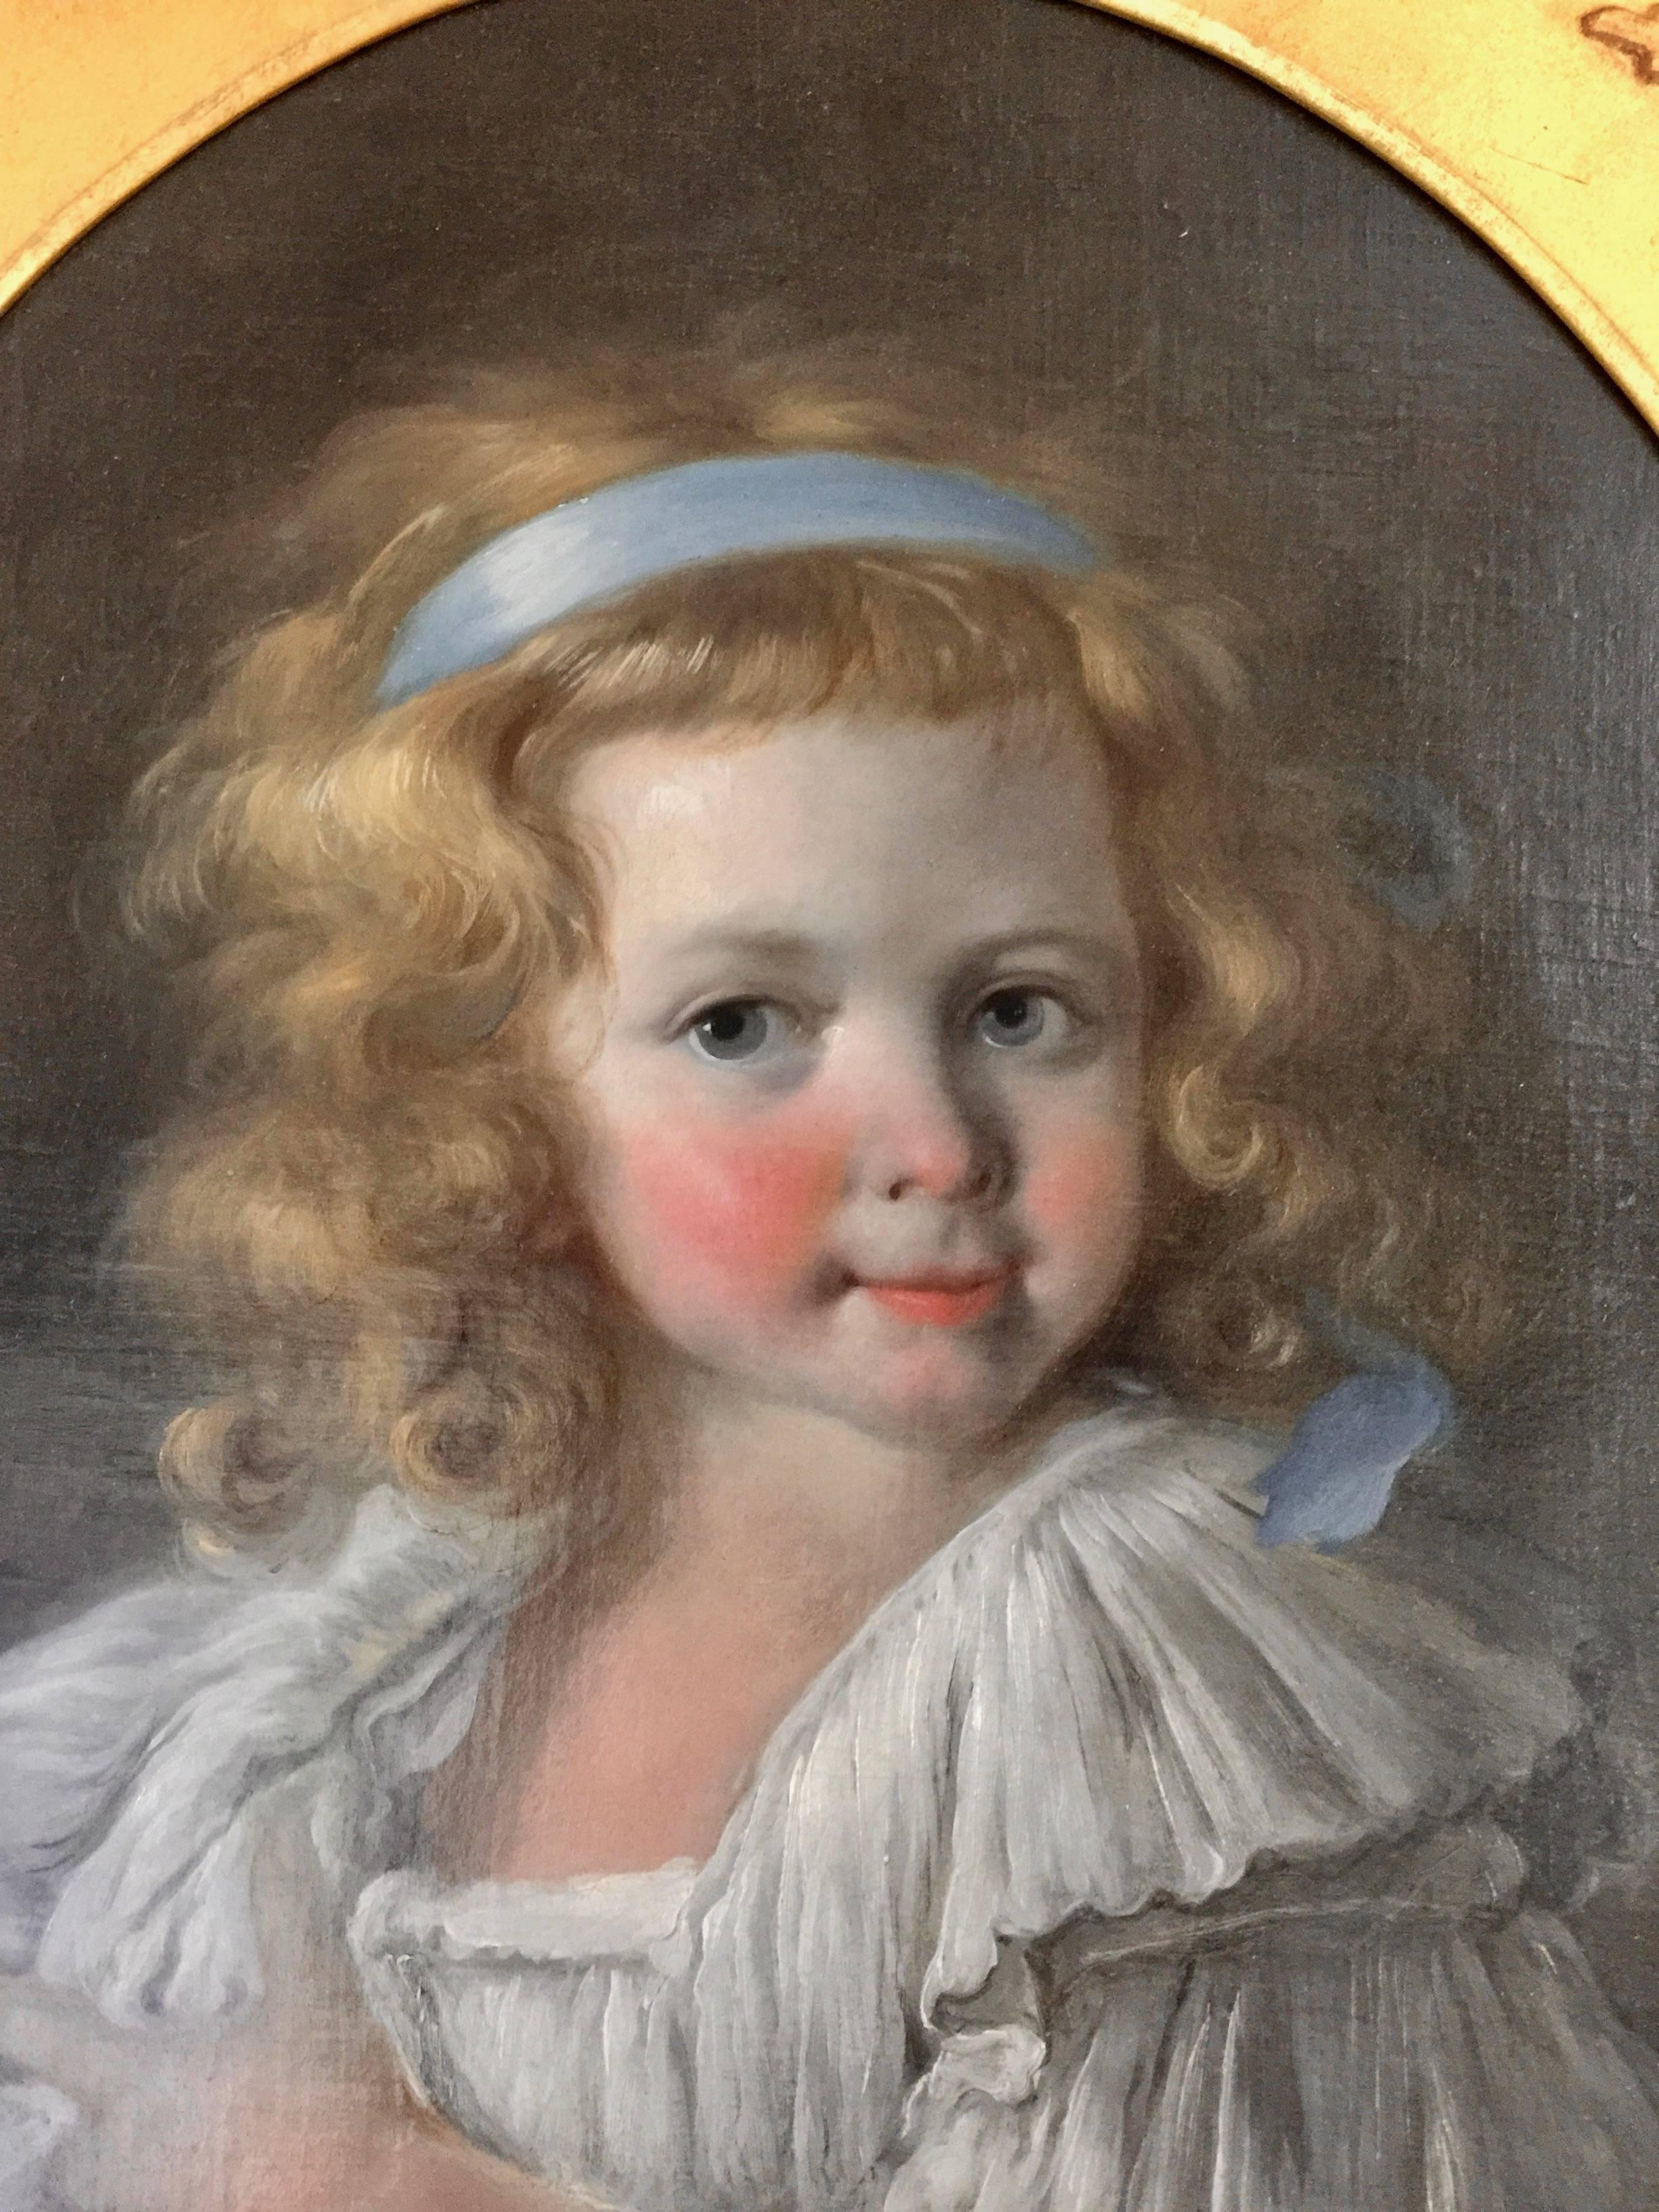 Early 19th century French Oval Portrait of a pretty Young Blonde French Girl - Painting by Unknown